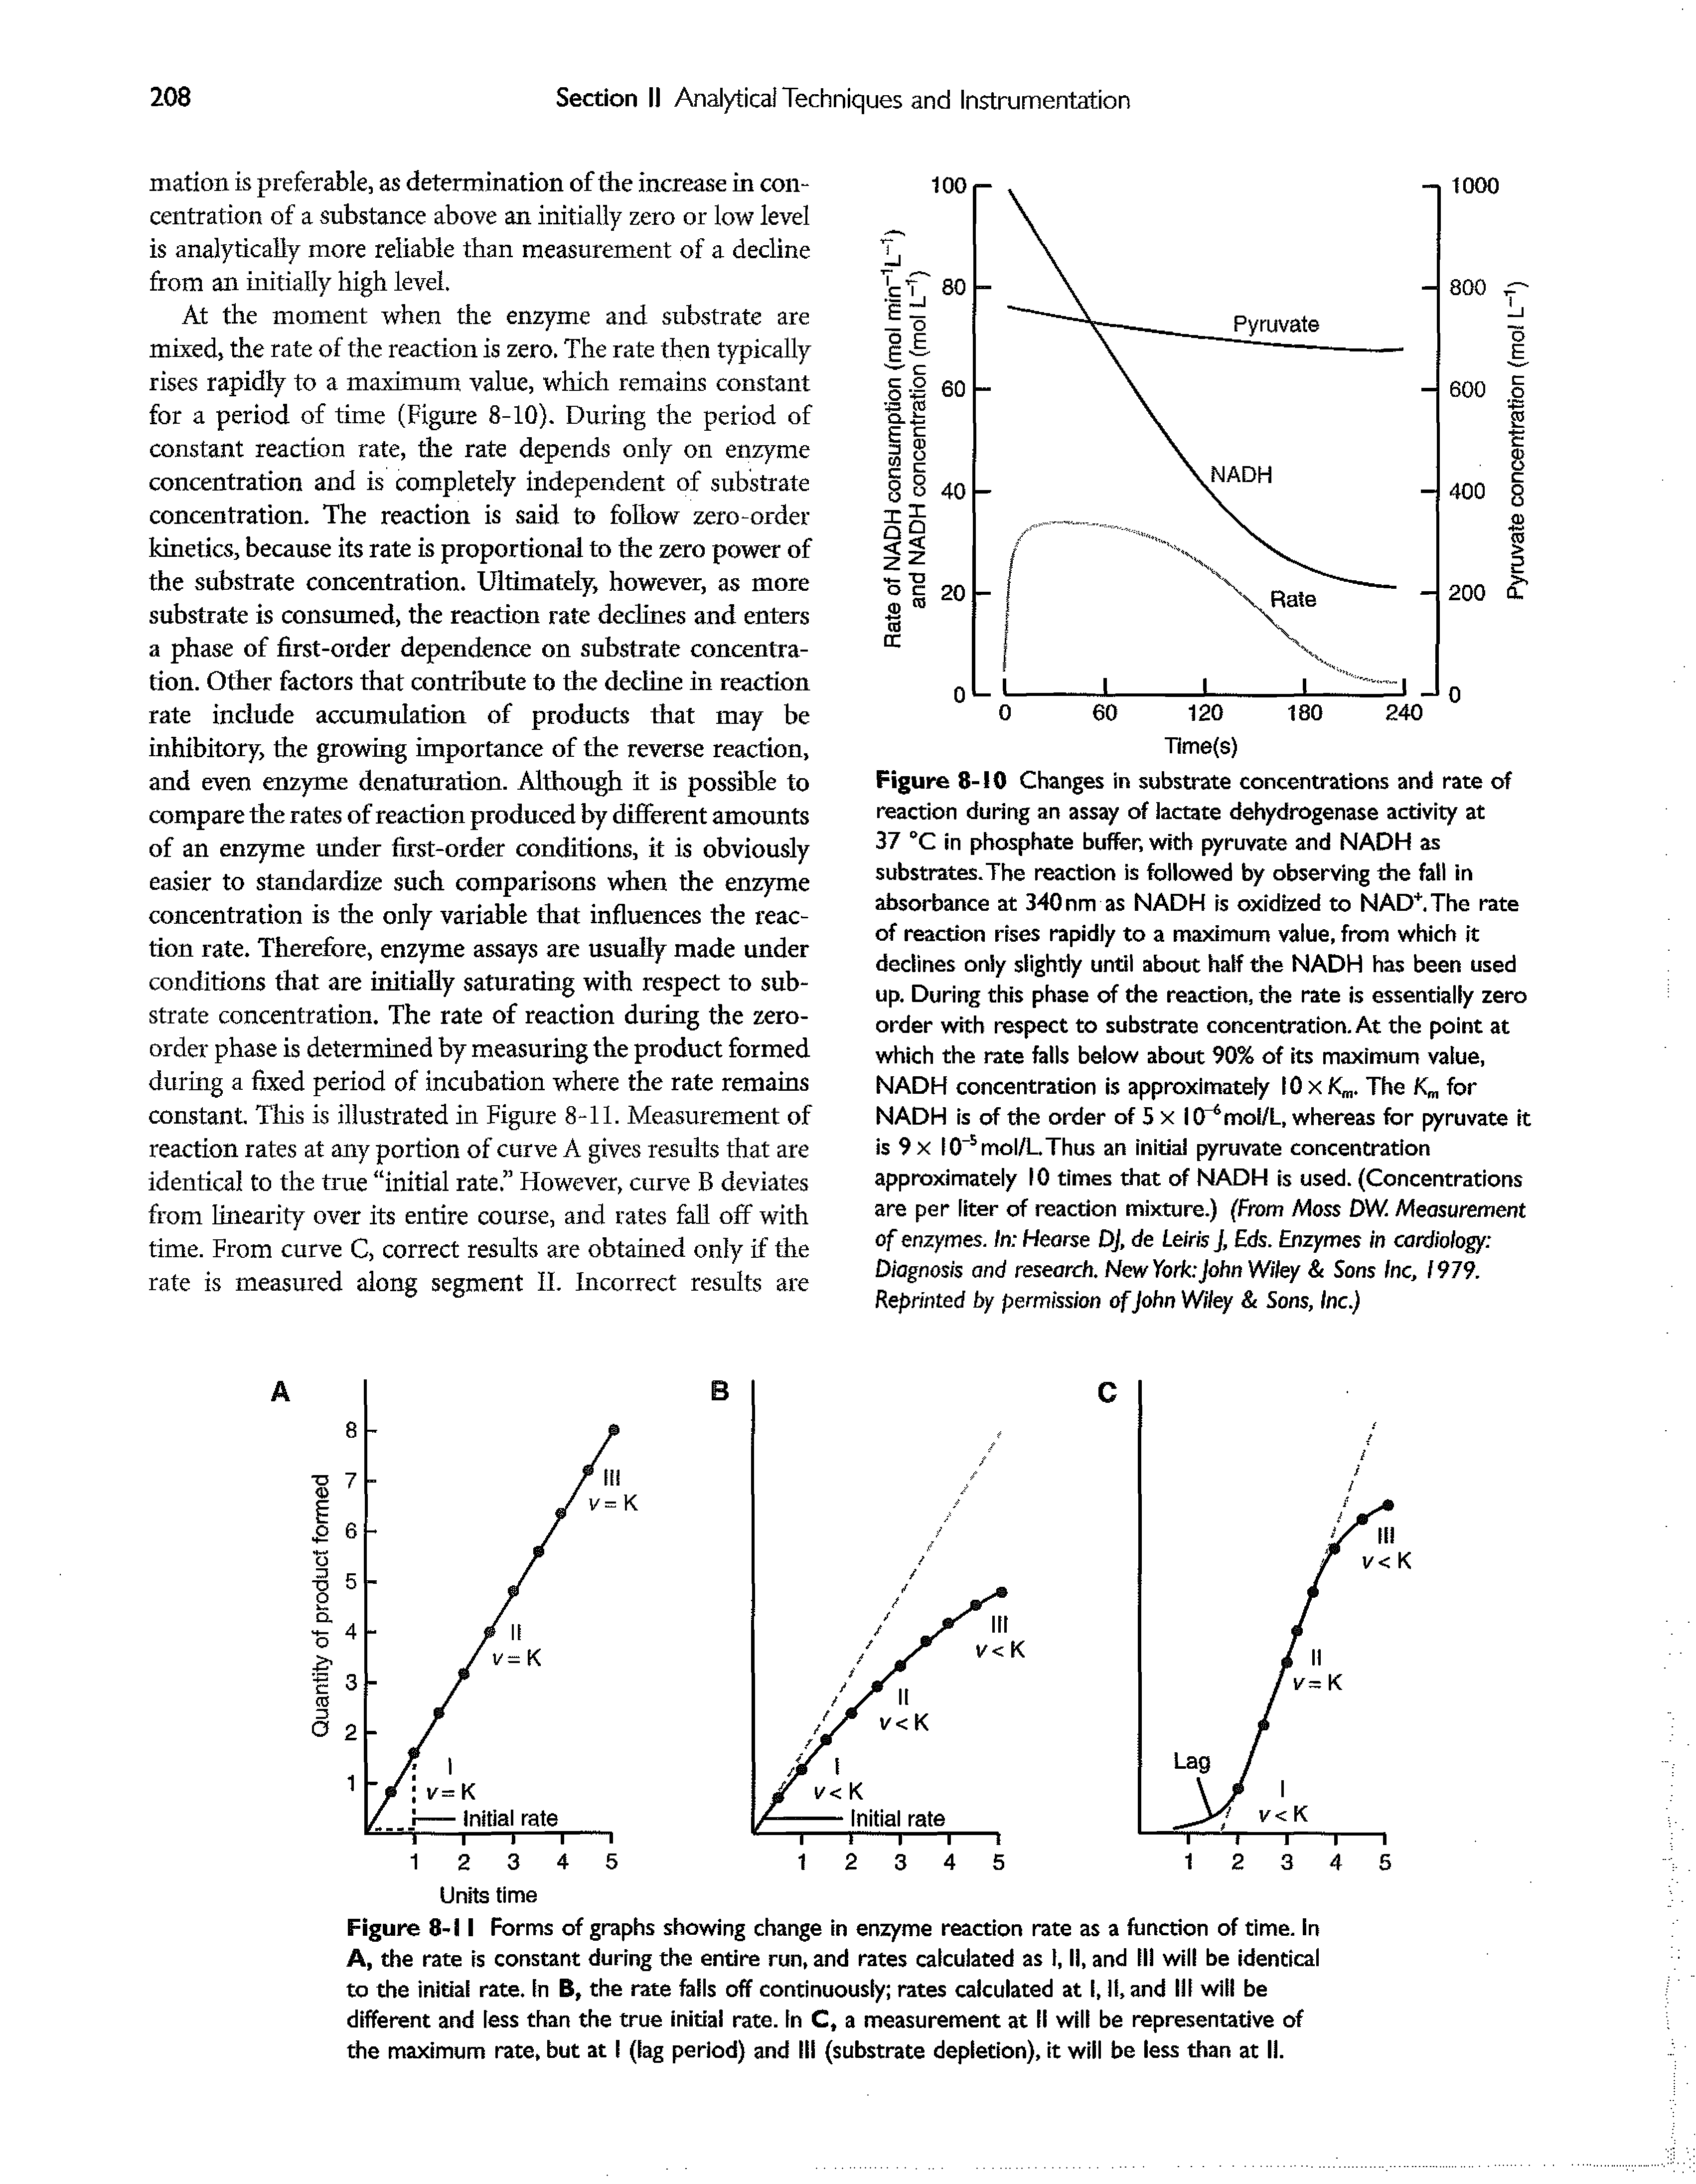 Figure 8-11 Forms of graphs showing change in enzyme reaction rate as a function of time, in A, the rate is constant during the entire run, and rates calculated as 1, II, and III will be identical to the initial rate. In B, the rate falls off continuously rates calculated at I, II, and III will be different and less than the true initial rate. In C, a measurement at II will be representative of the maximum rate, but at I (lag period) and III (substrate depletion), it will be less than at II.